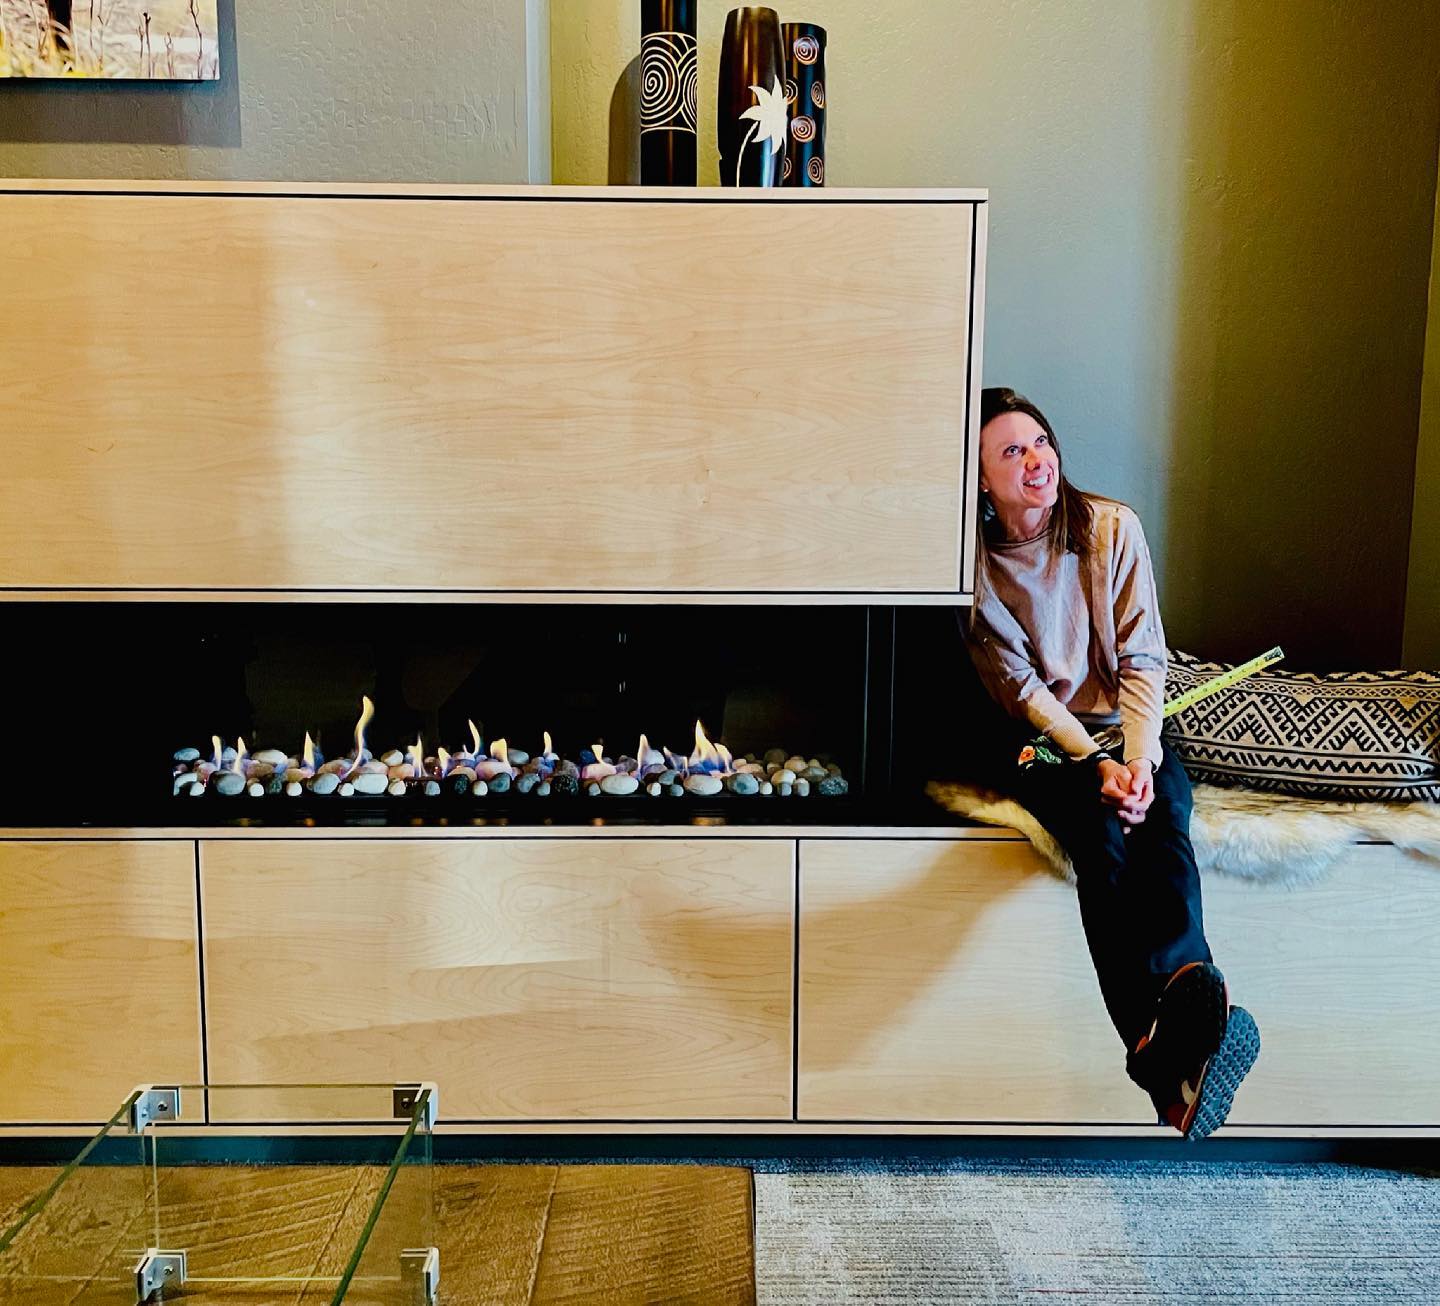 Debating fireplace sizes...doesn’t all this glass look so good?? 51 inches of glass doesn’t seem like too much, does it?? whitefish custom home builder